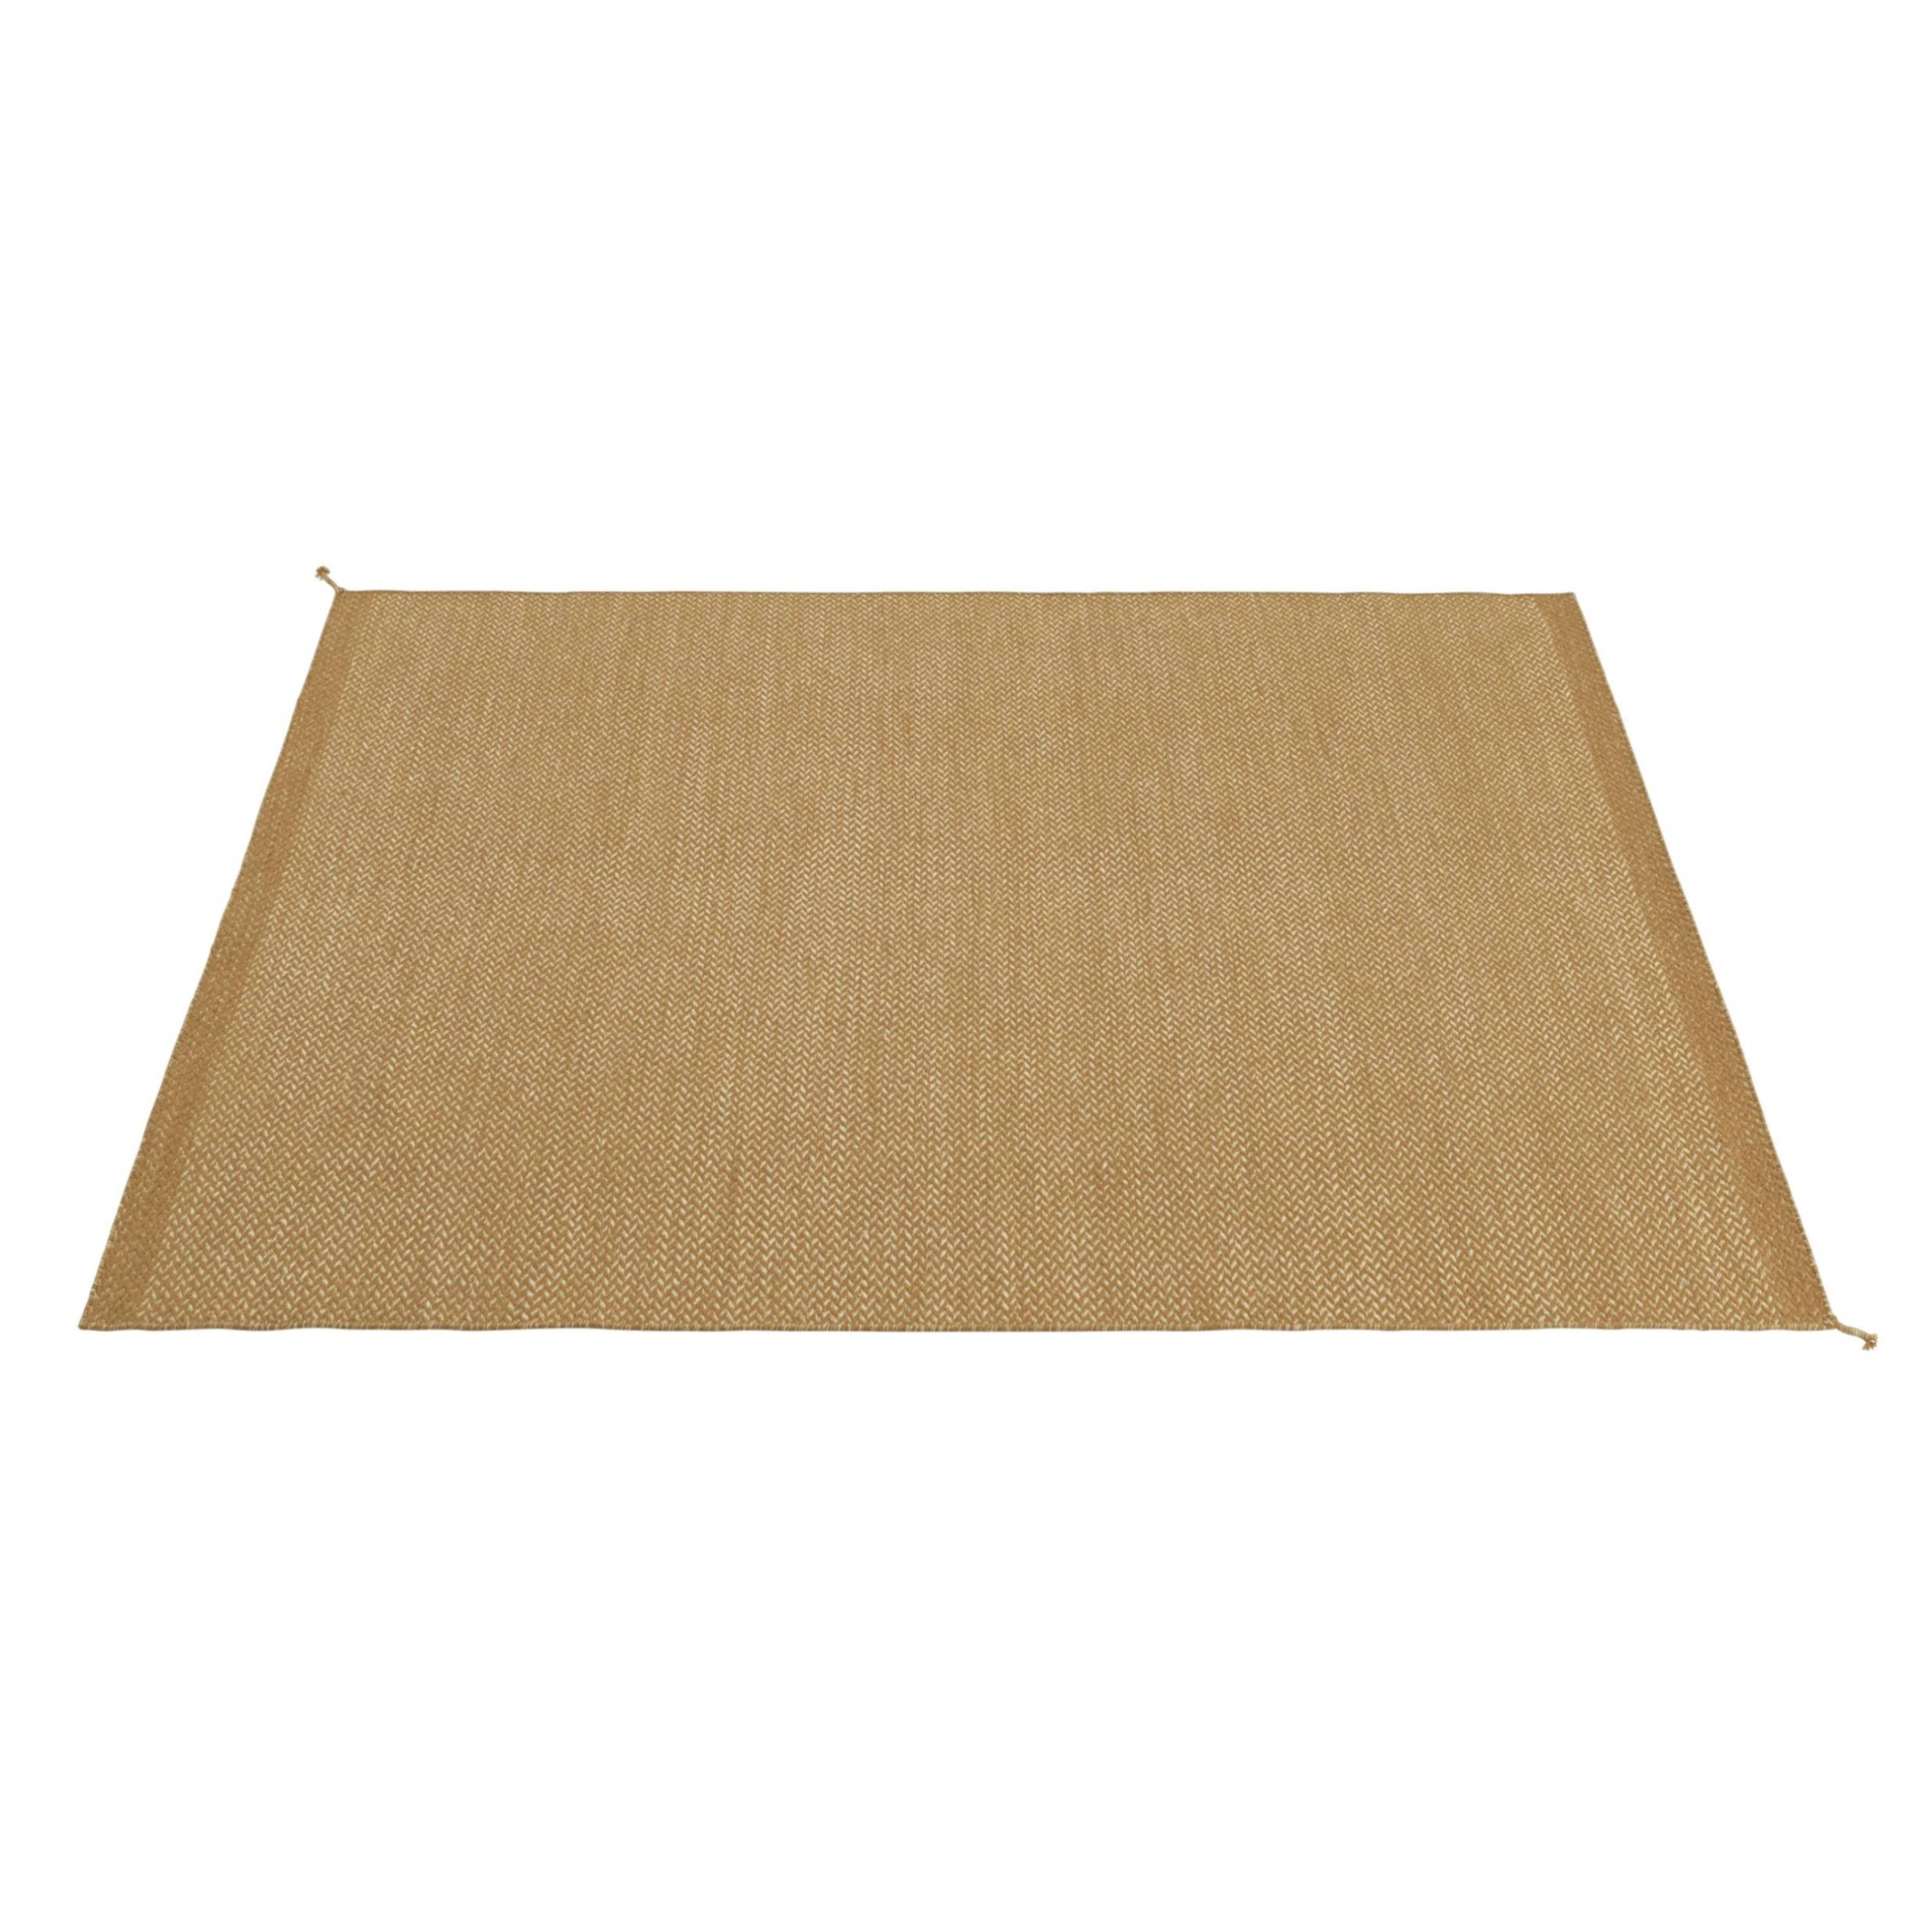 Ply Rug: XX Large - 157.5